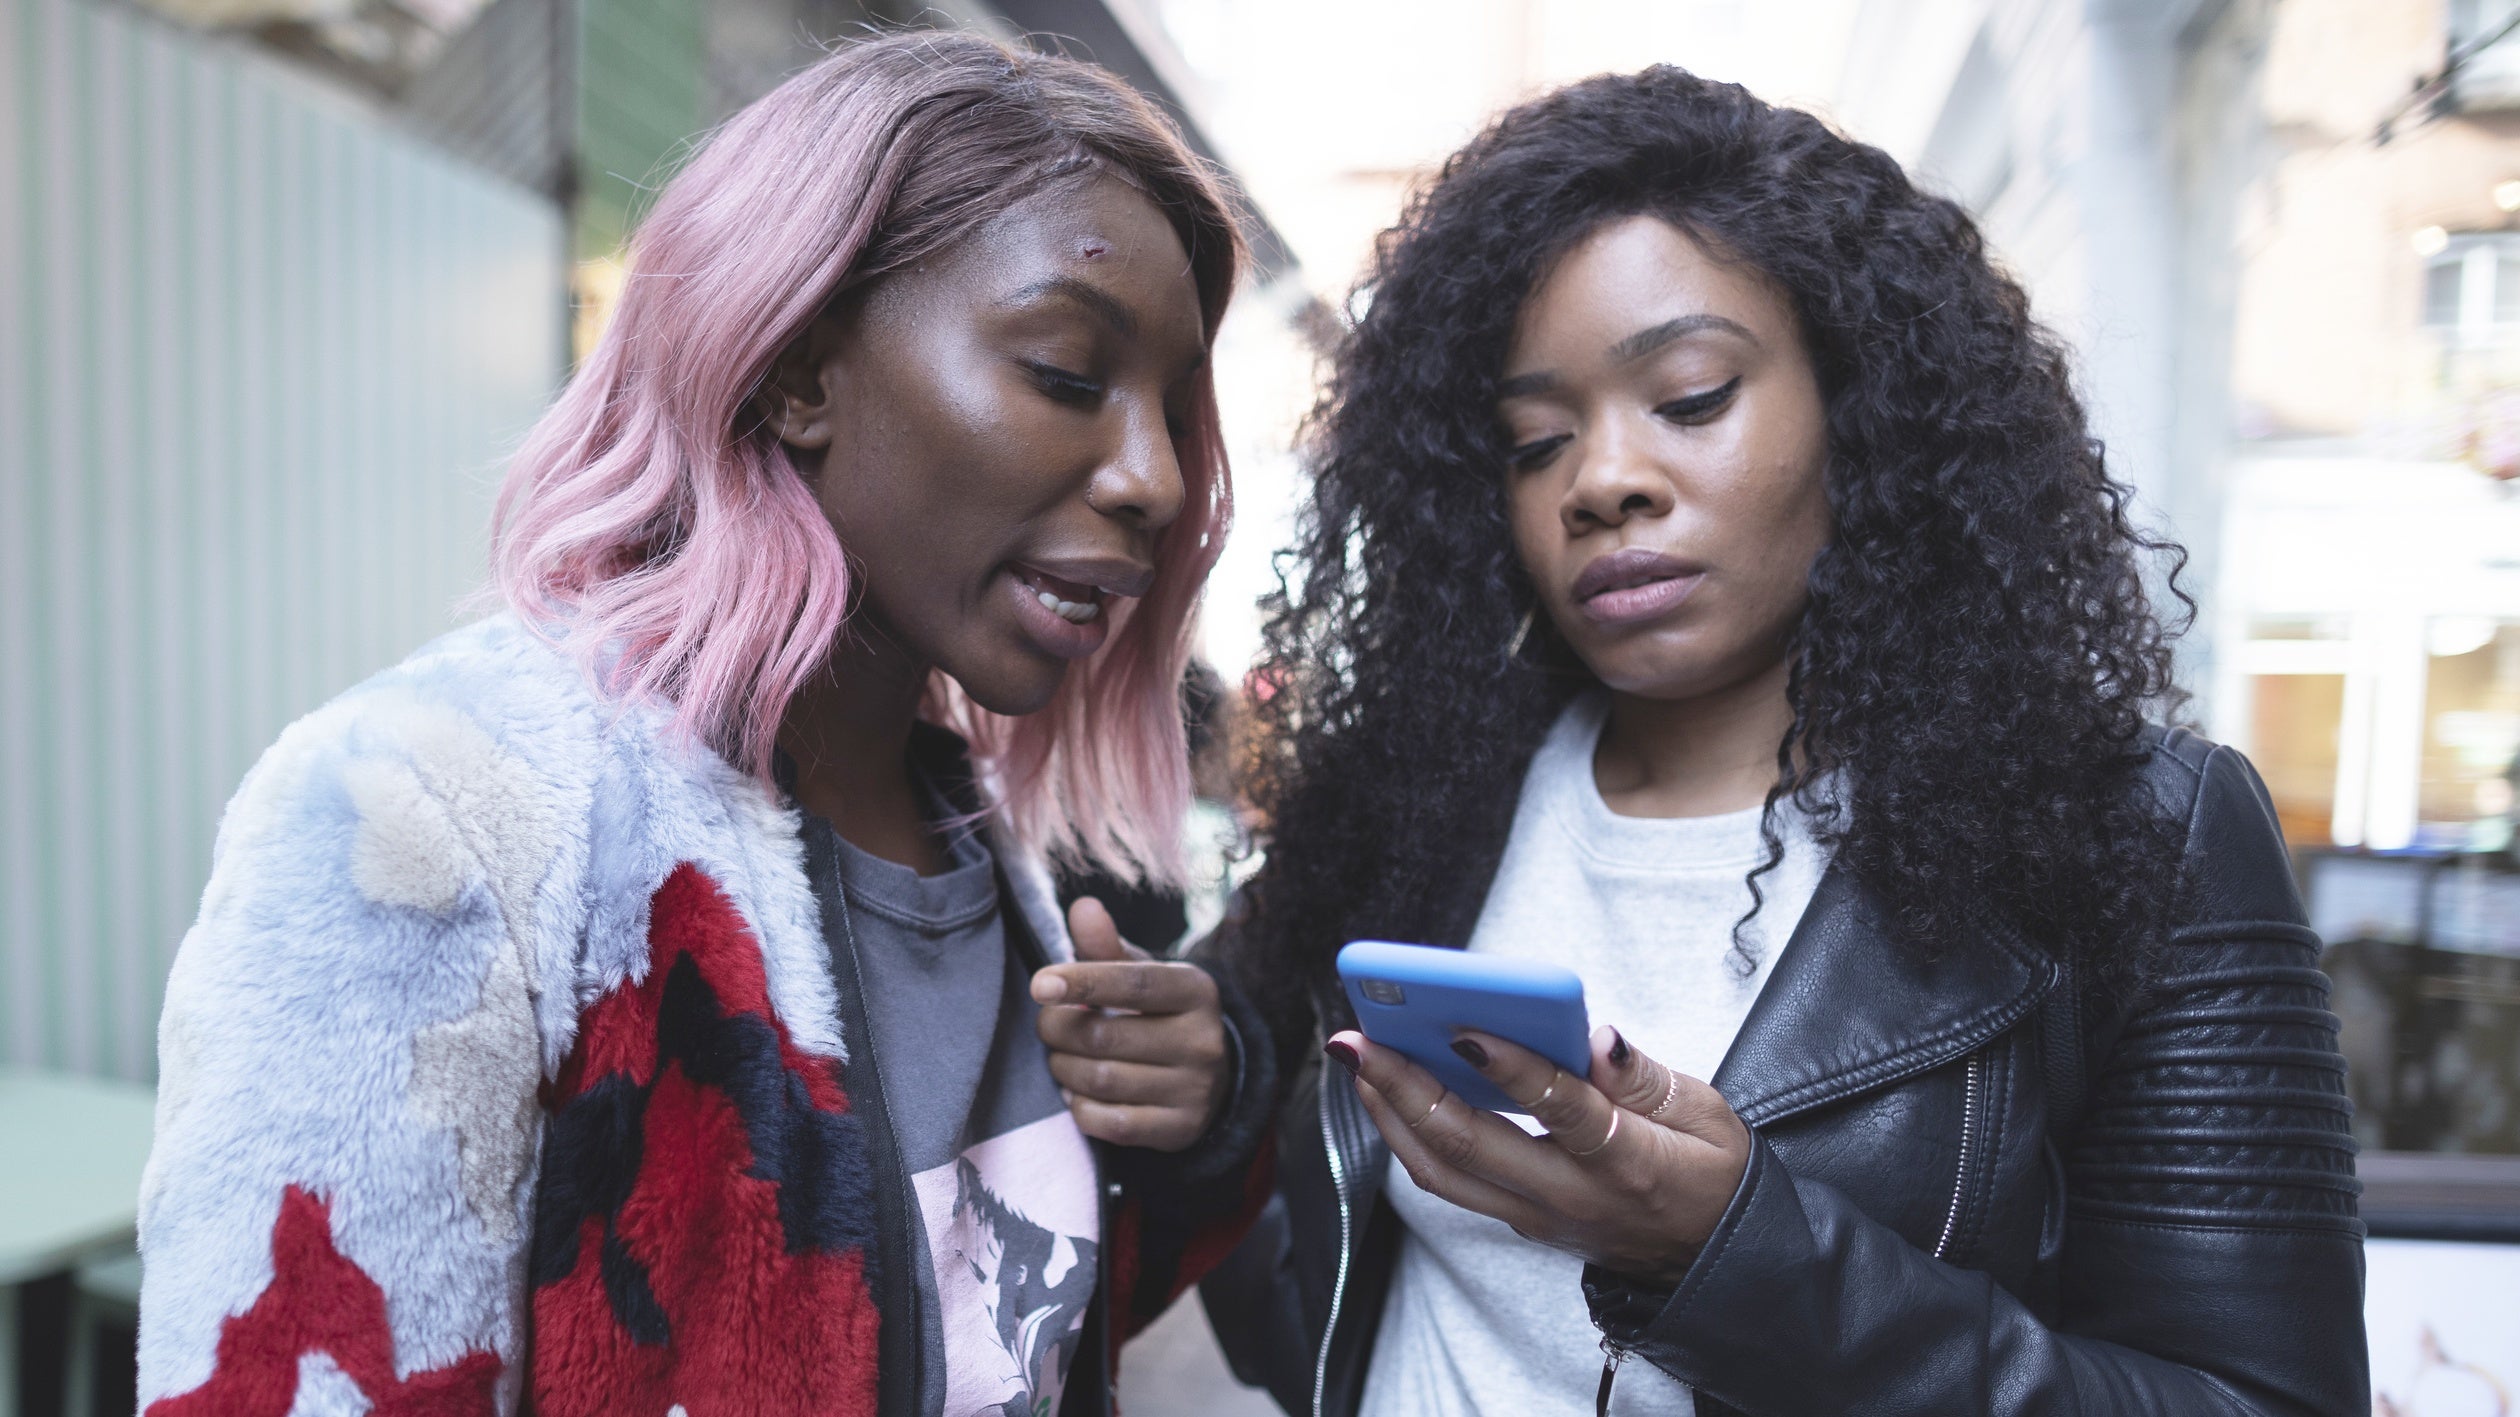 Weruche Opia On Being Tapped As Michaela Coel’s Bestie In ‘I May Destroy You’